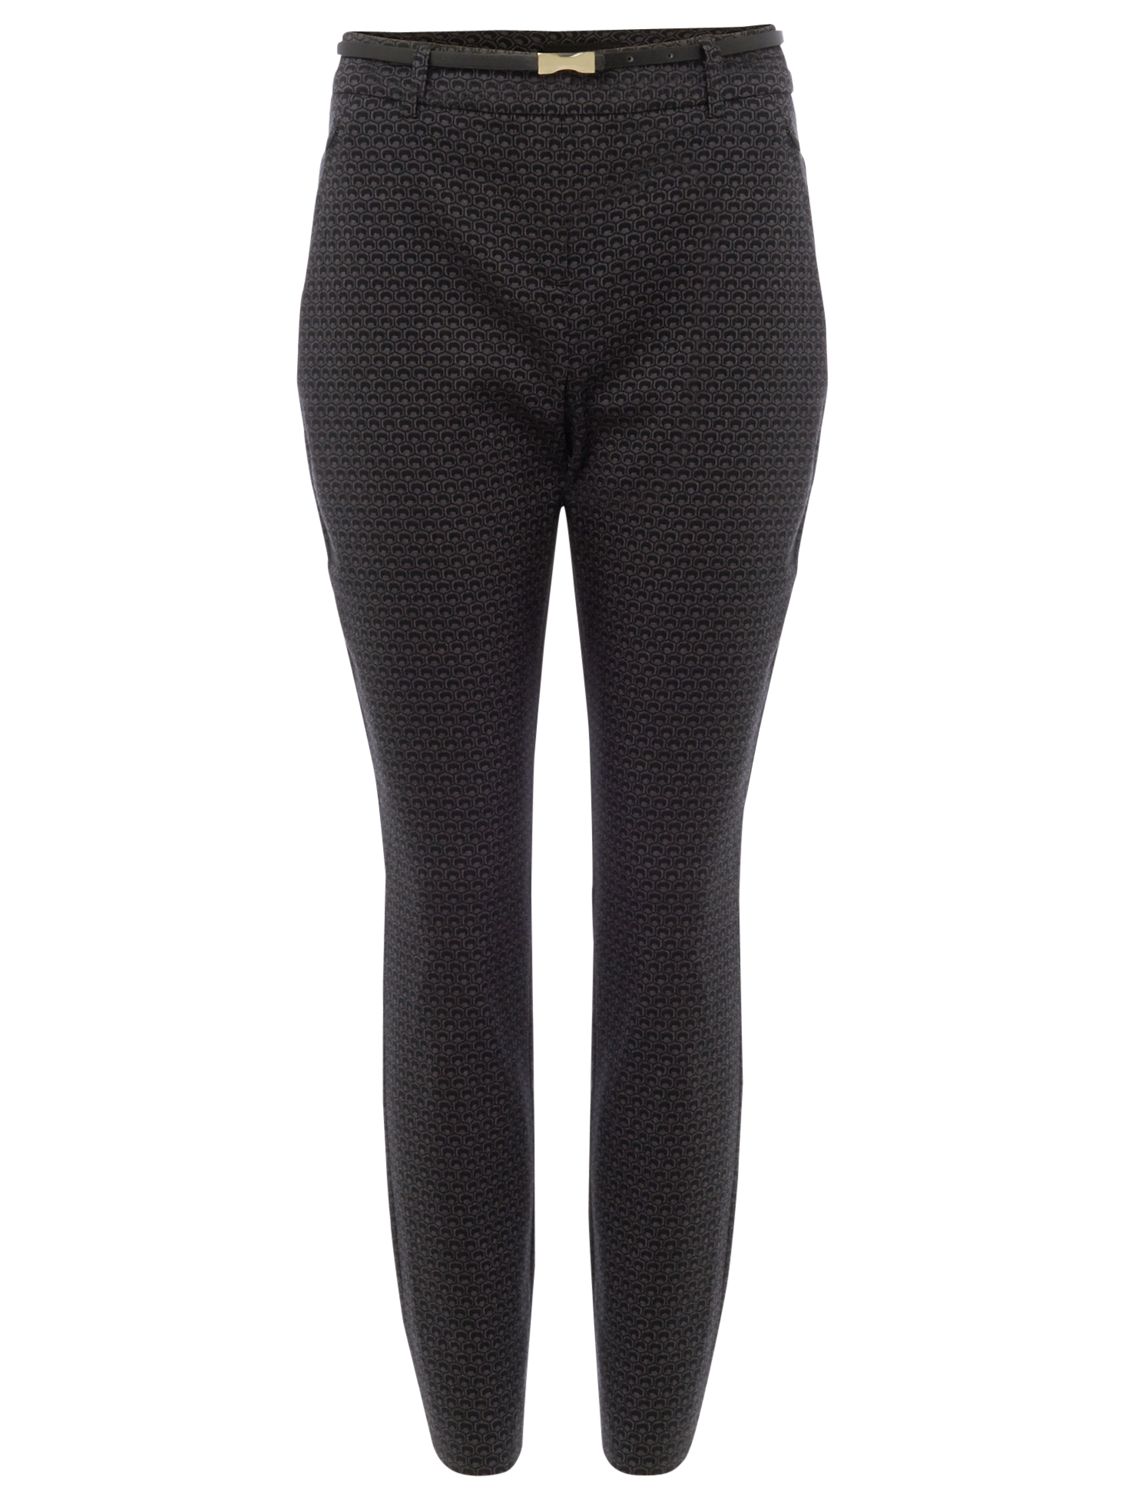 Phase Eight Alice Jacquard Trousers, Black/Grey